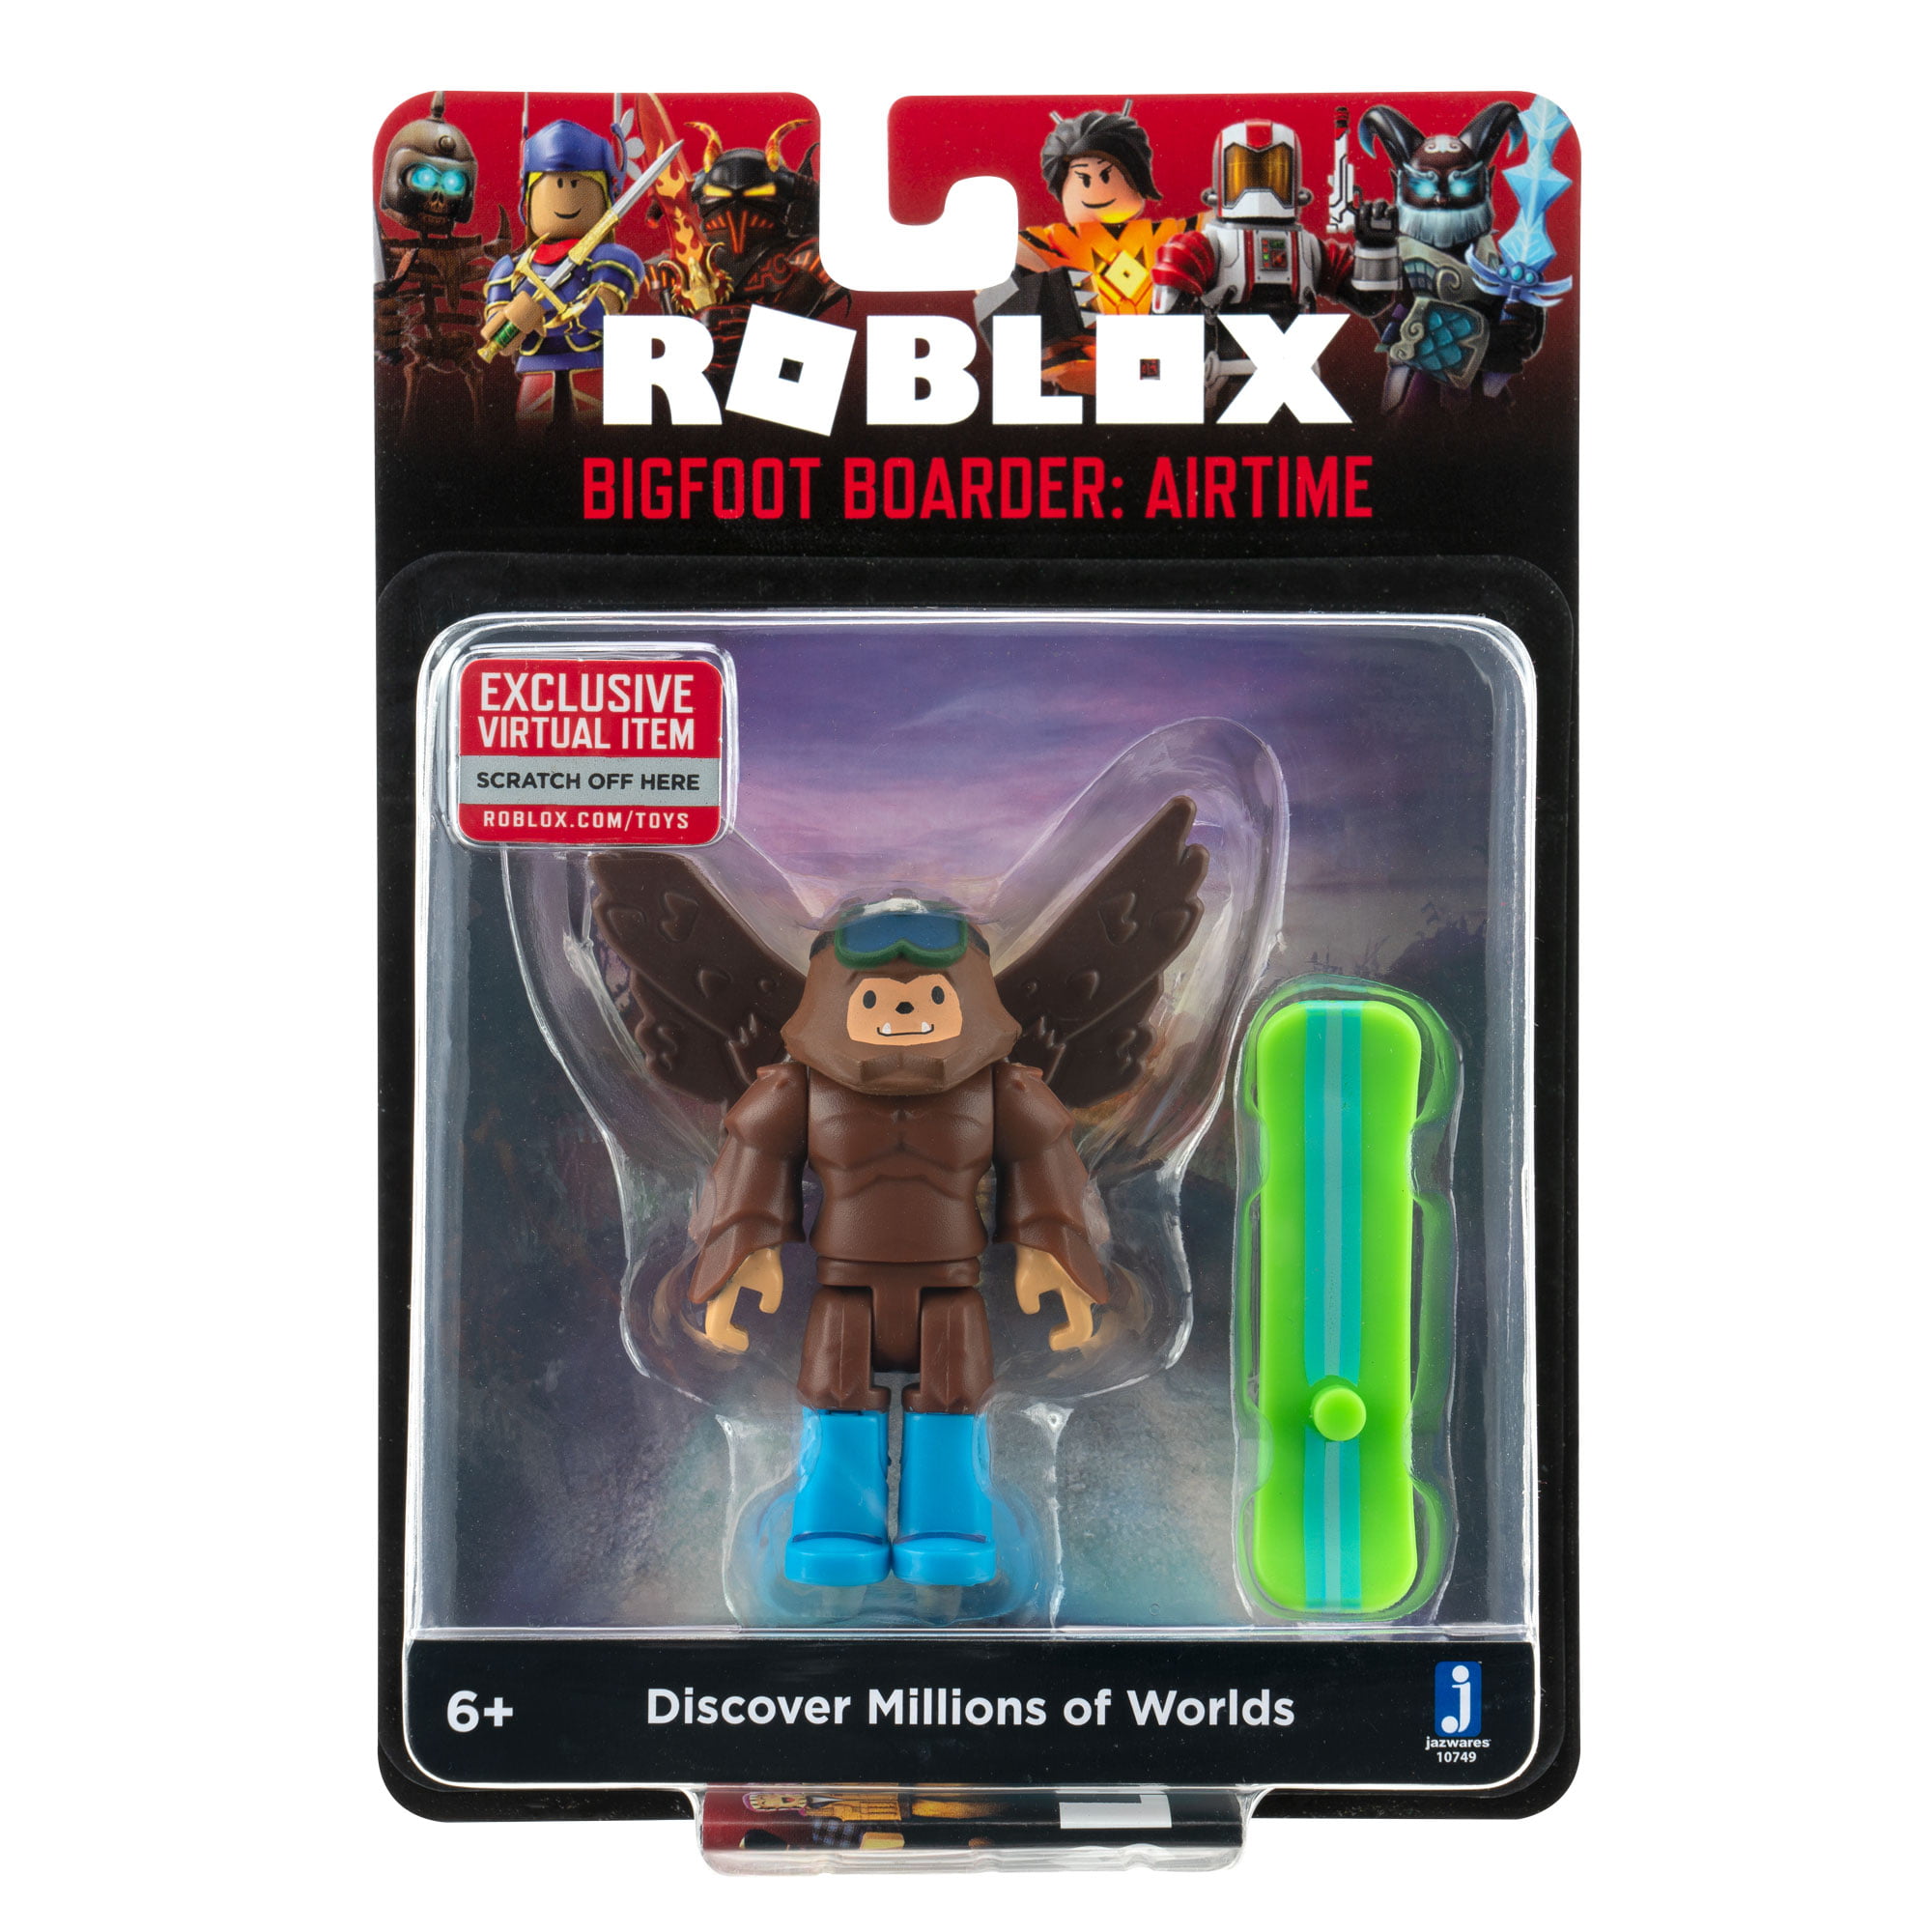 Roblox Action Collection Bigfoot Boarder Airtime Figure Pack Includes Exclusive Virtual Item Walmart Com Walmart Com - controls for shred on roblox